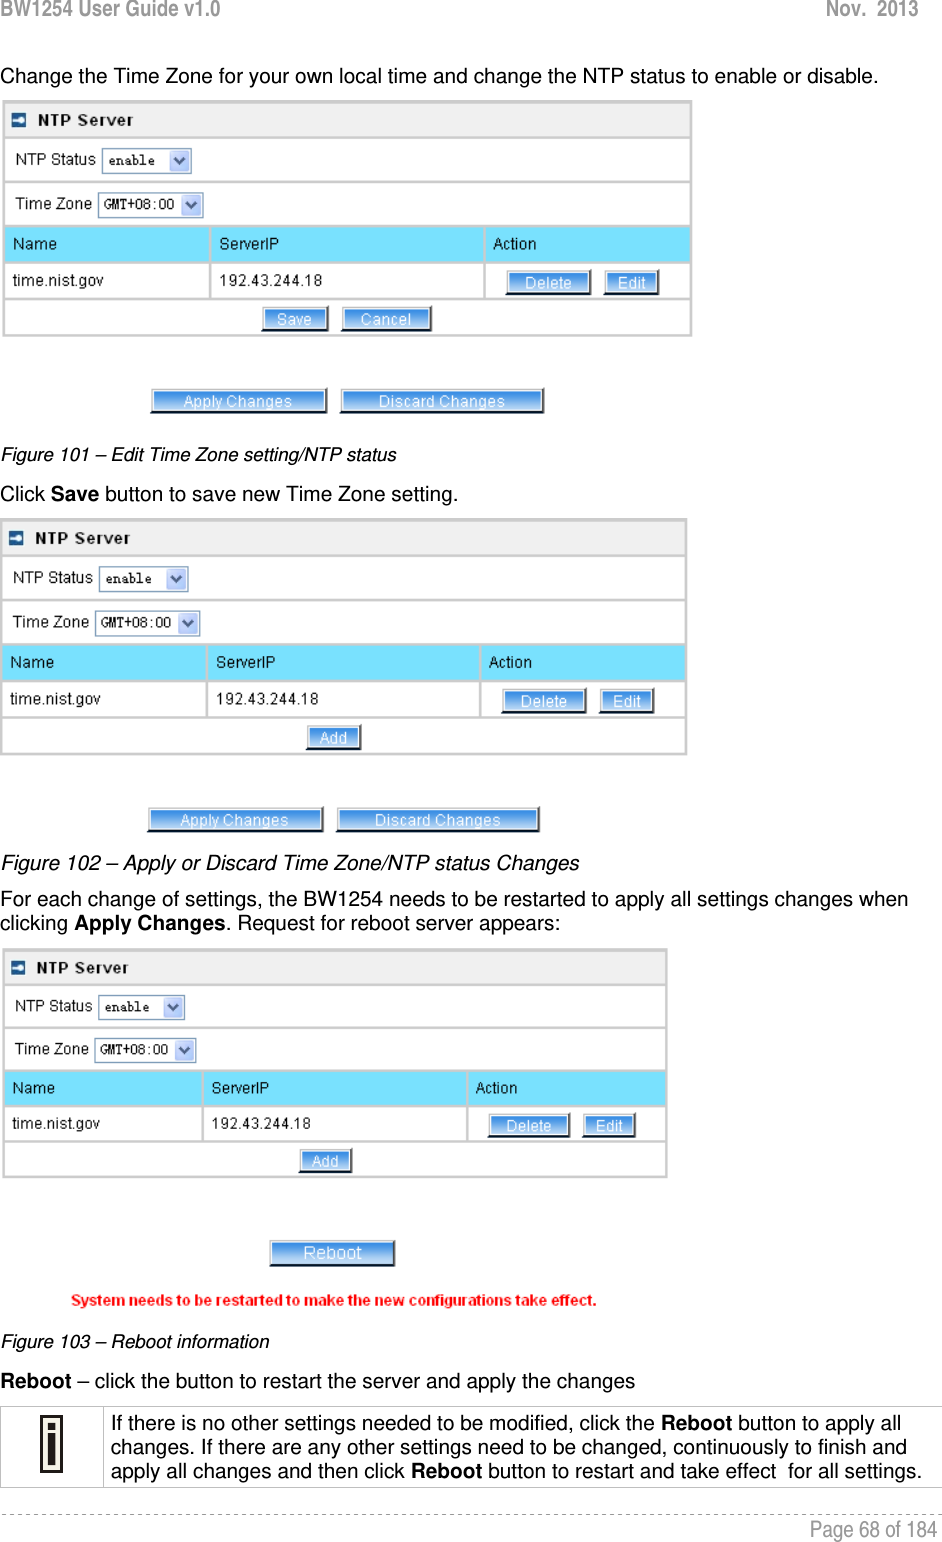 BW1254 User Guide v1.0  Nov.  2013     Page 68 of 184   Change the Time Zone for your own local time and change the NTP status to enable or disable.  Figure 101 – Edit Time Zone setting/NTP status Click Save button to save new Time Zone setting.  Figure 102 – Apply or Discard Time Zone/NTP status Changes For each change of settings, the BW1254 needs to be restarted to apply all settings changes when clicking Apply Changes. Request for reboot server appears:  Figure 103 – Reboot information Reboot – click the button to restart the server and apply the changes  If there is no other settings needed to be modified, click the Reboot button to apply all changes. If there are any other settings need to be changed, continuously to finish and apply all changes and then click Reboot button to restart and take effect  for all settings. 